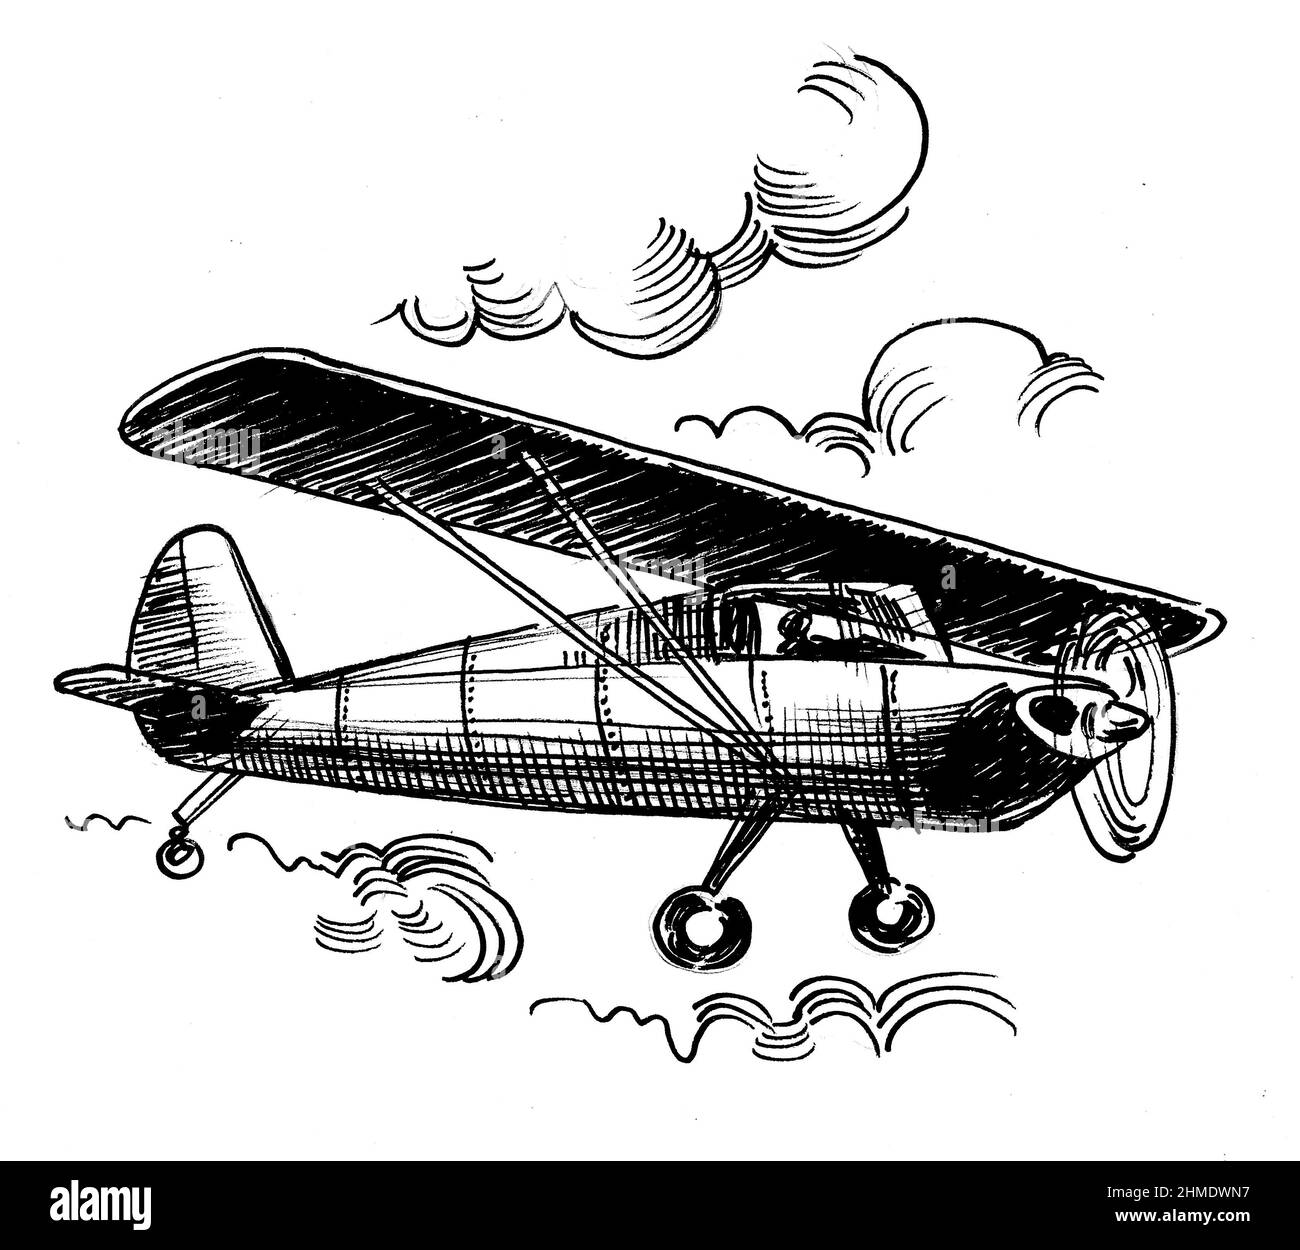 Flying retro aircraft. Ink black and white drawing Stock Photo - Alamy